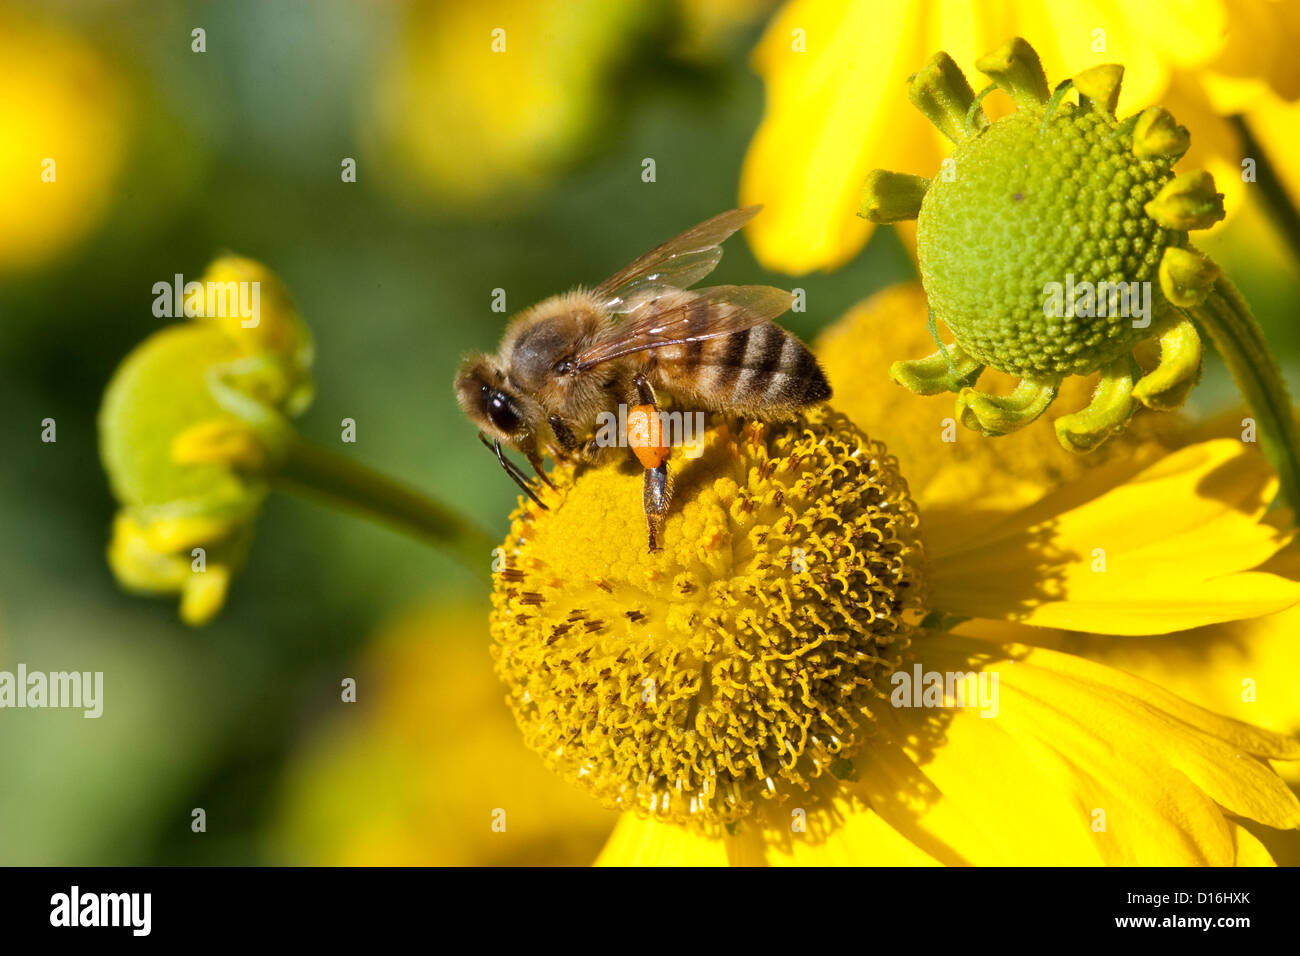 Honey bee collecting nectar from a yellow flower Stock Photo